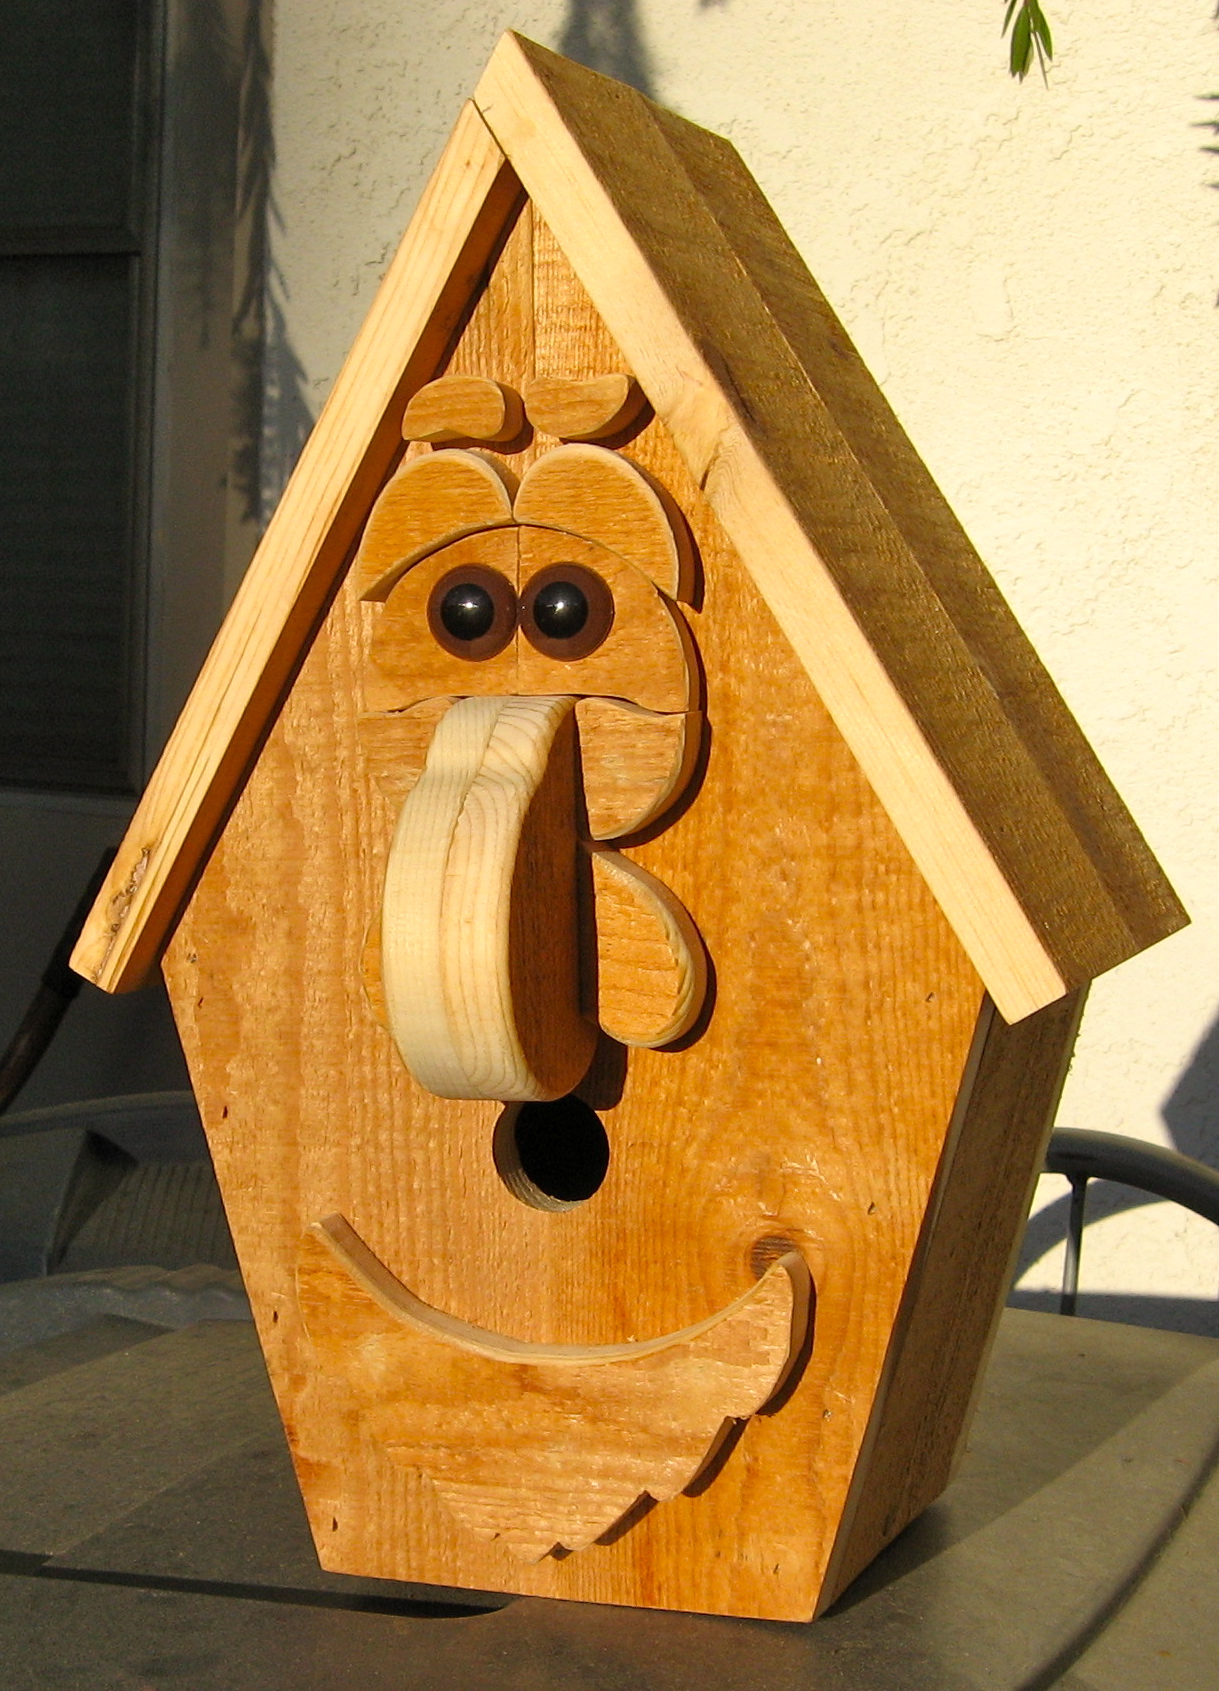 Building Funny Birdhouse - Made by Alan